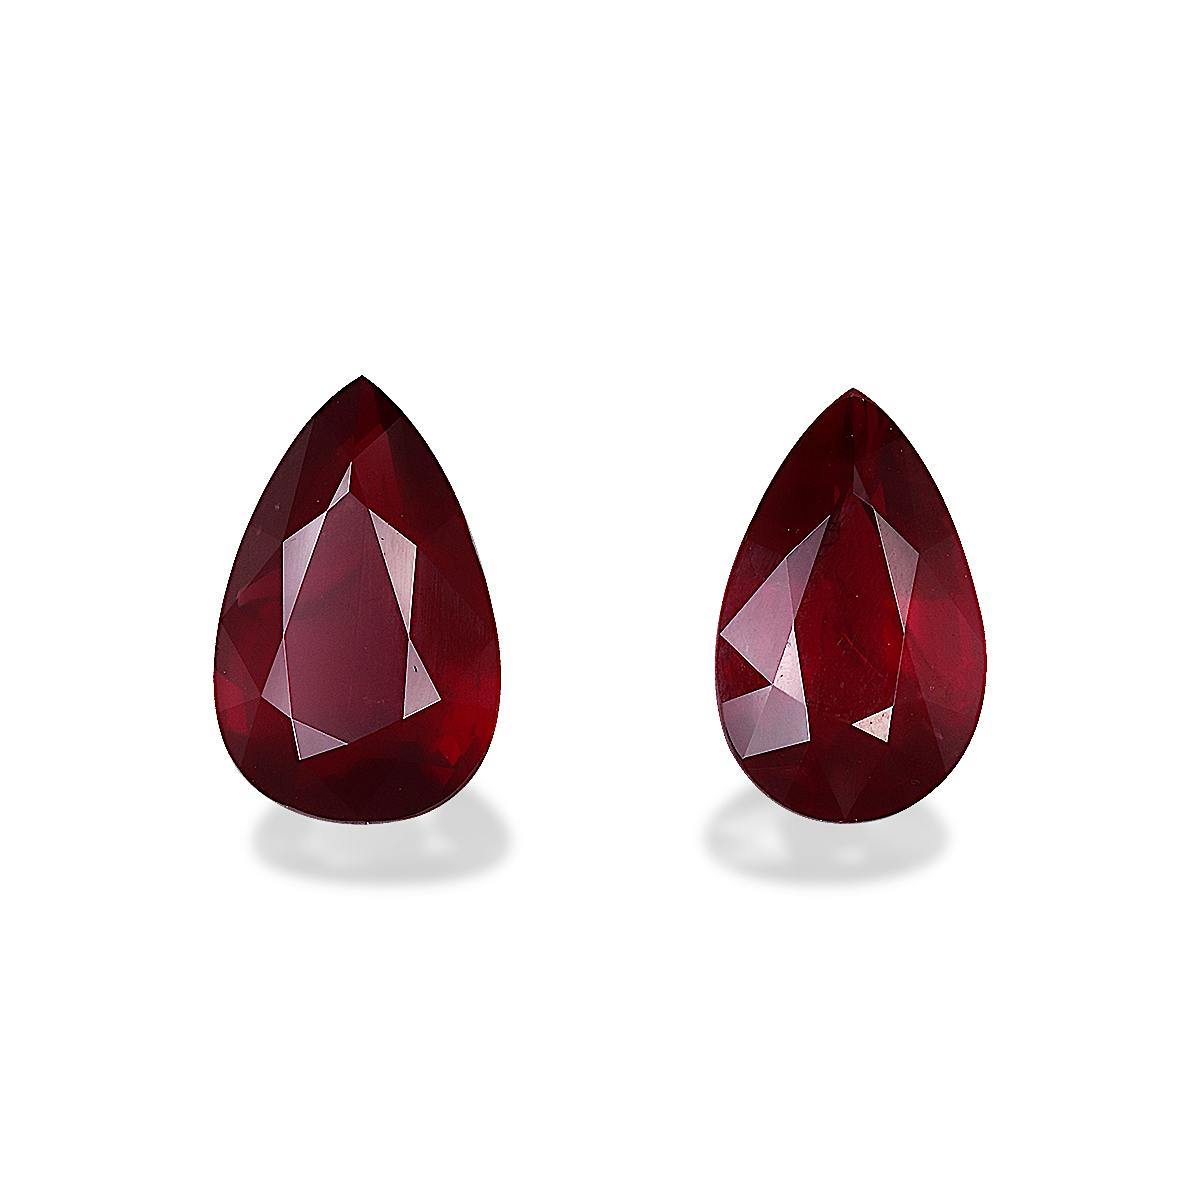 Pigeons Blood Mozambique Ruby 10.04ct - Main Image